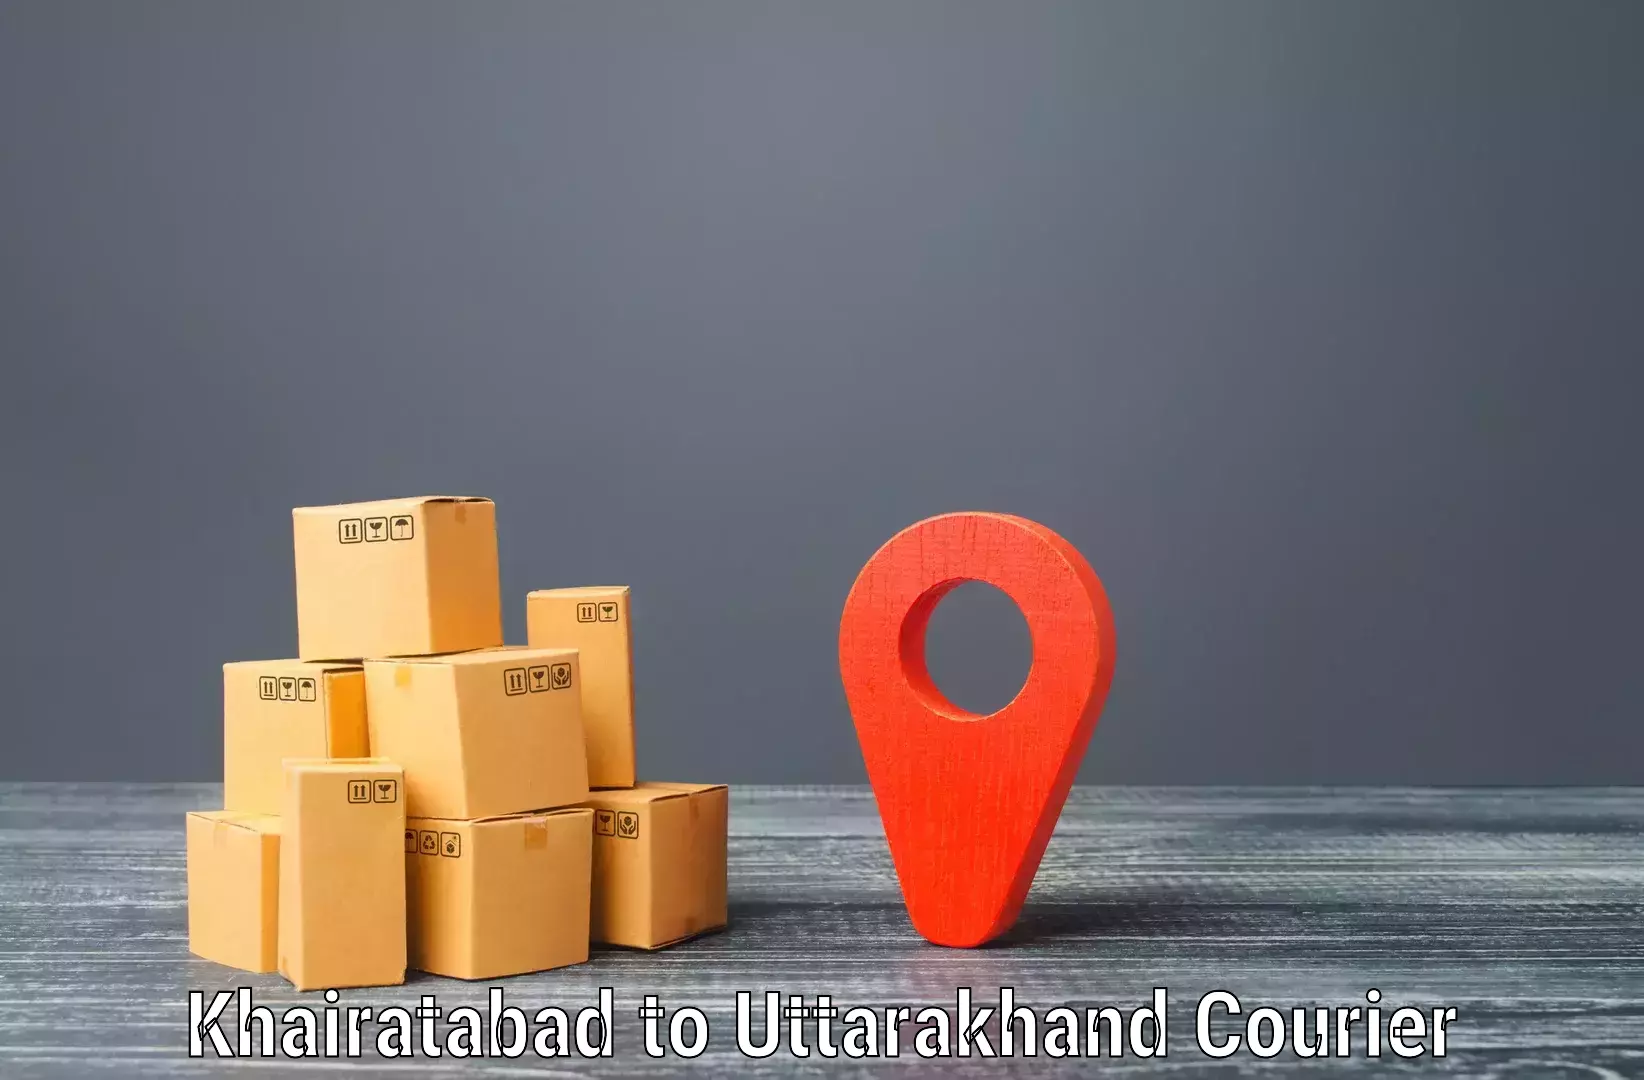 Customer-centric shipping Khairatabad to Roorkee